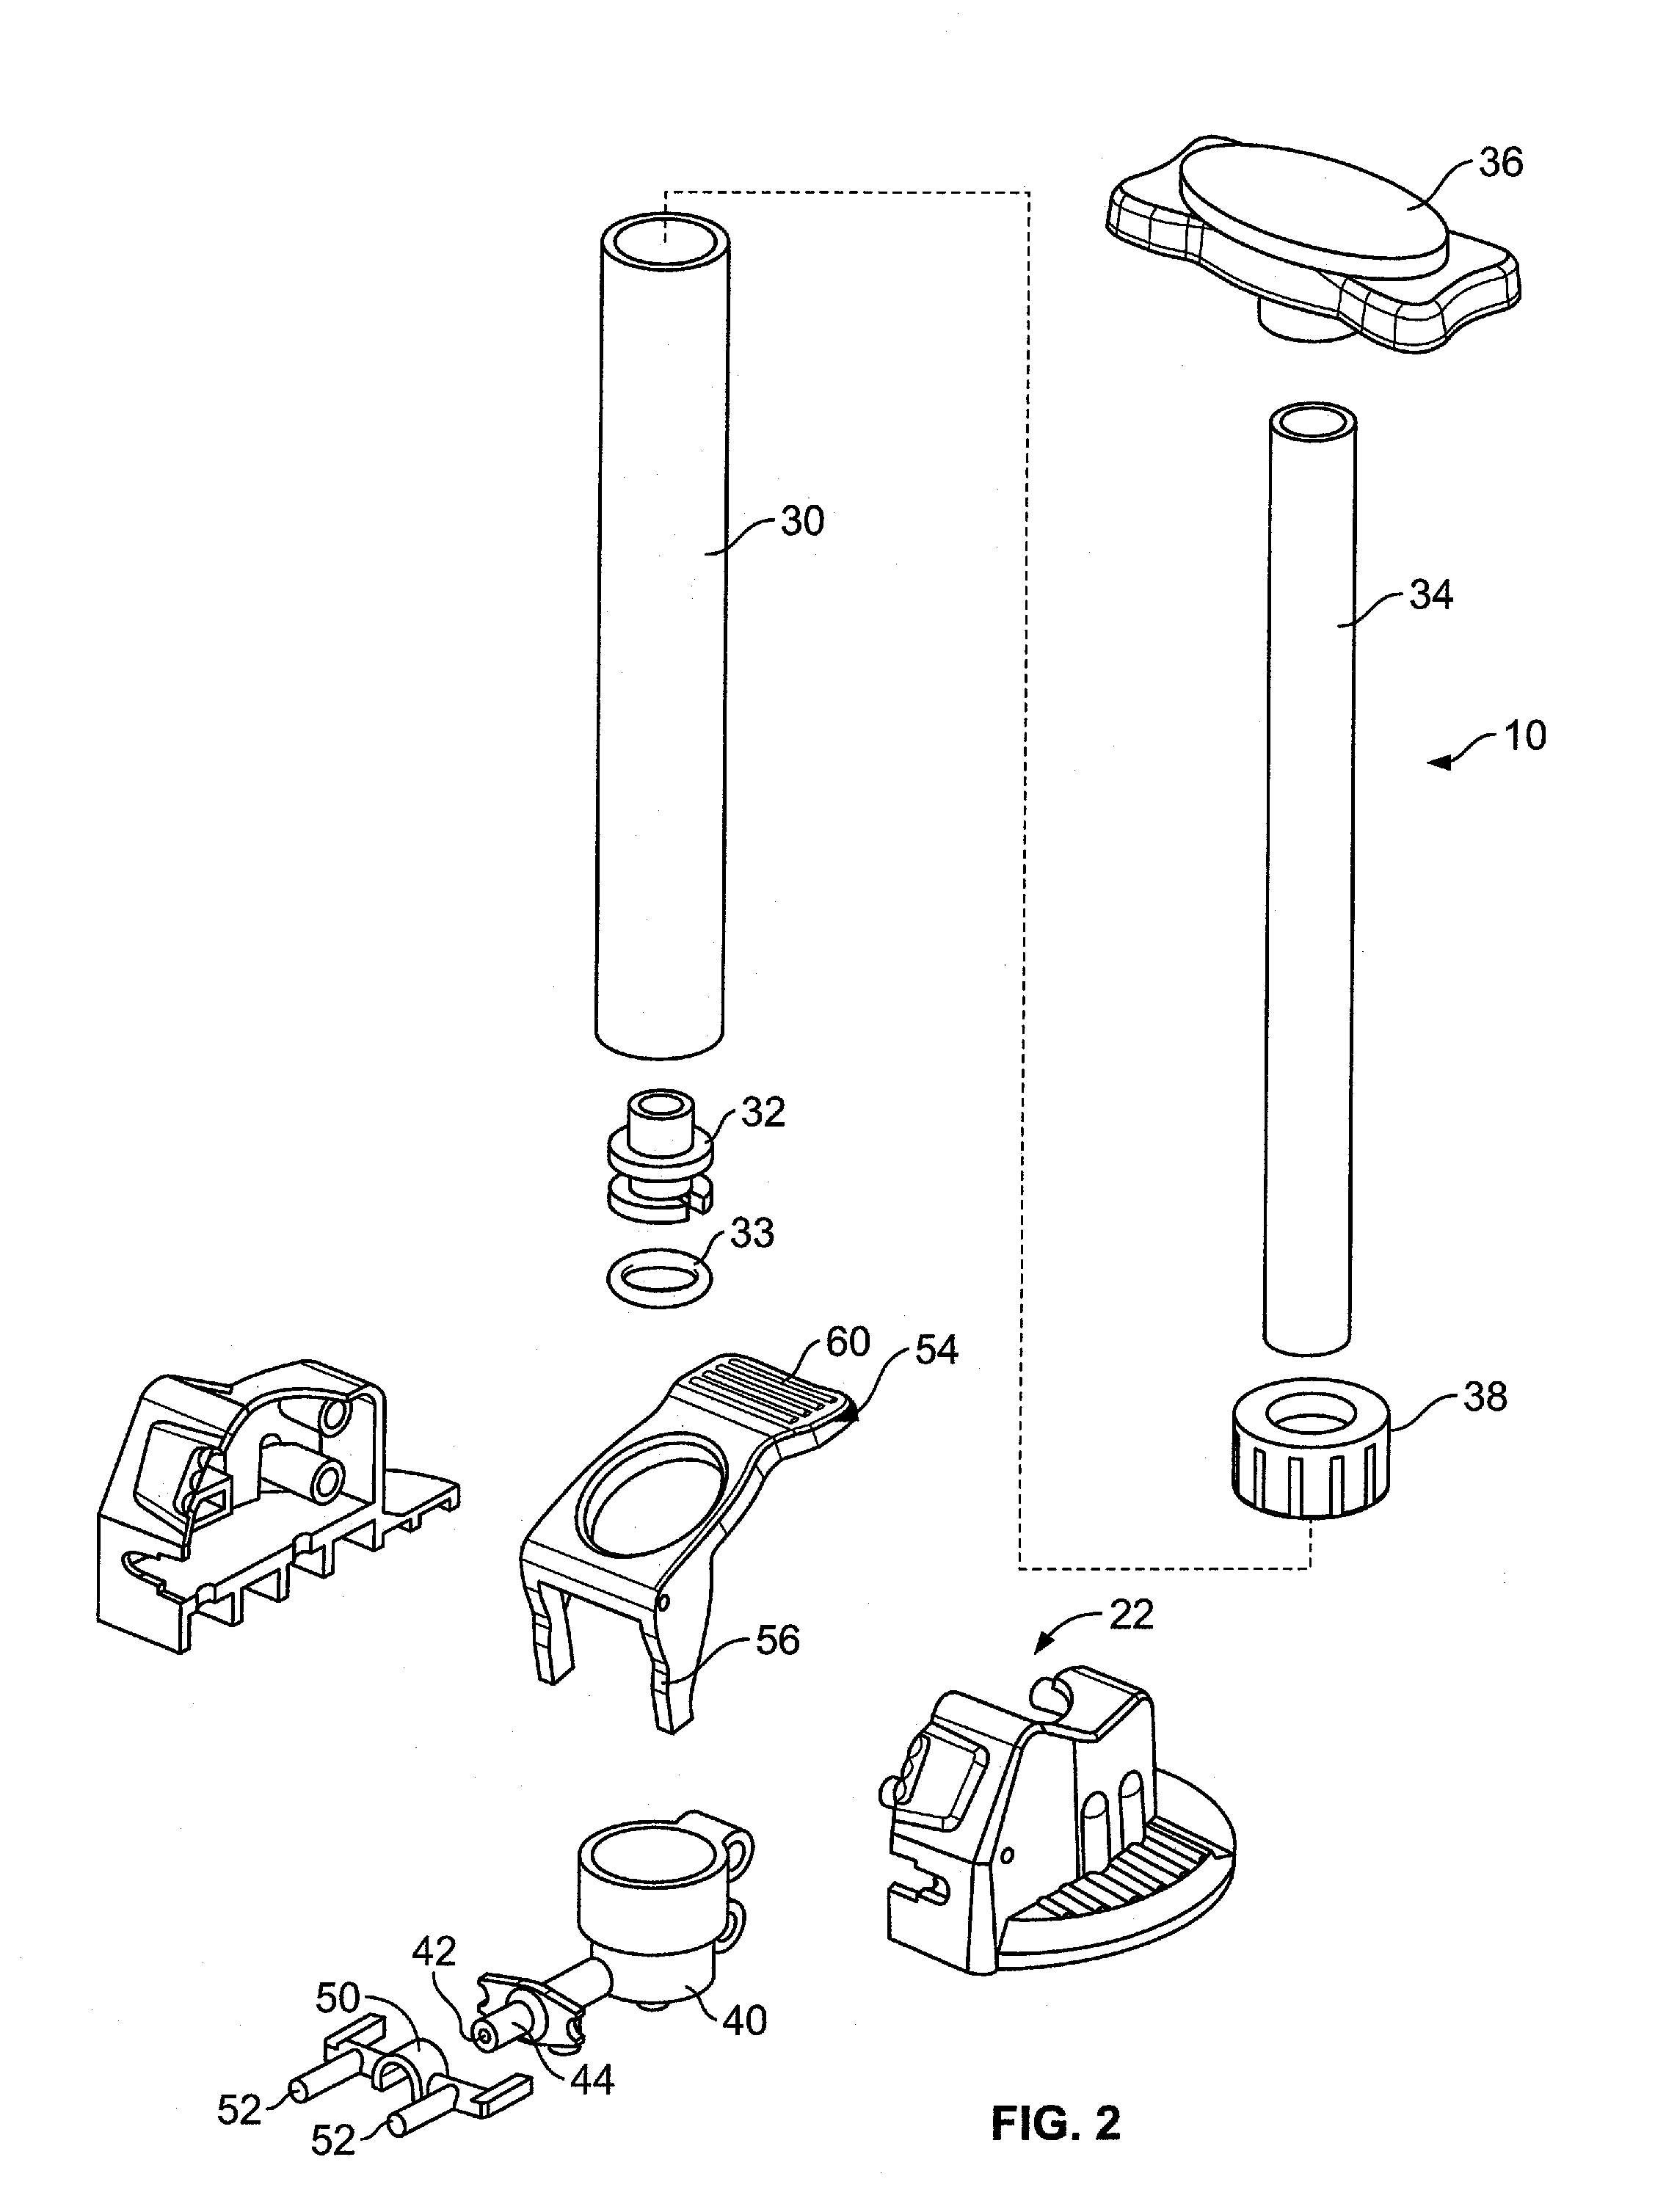 Pneumatic pump and vehicle